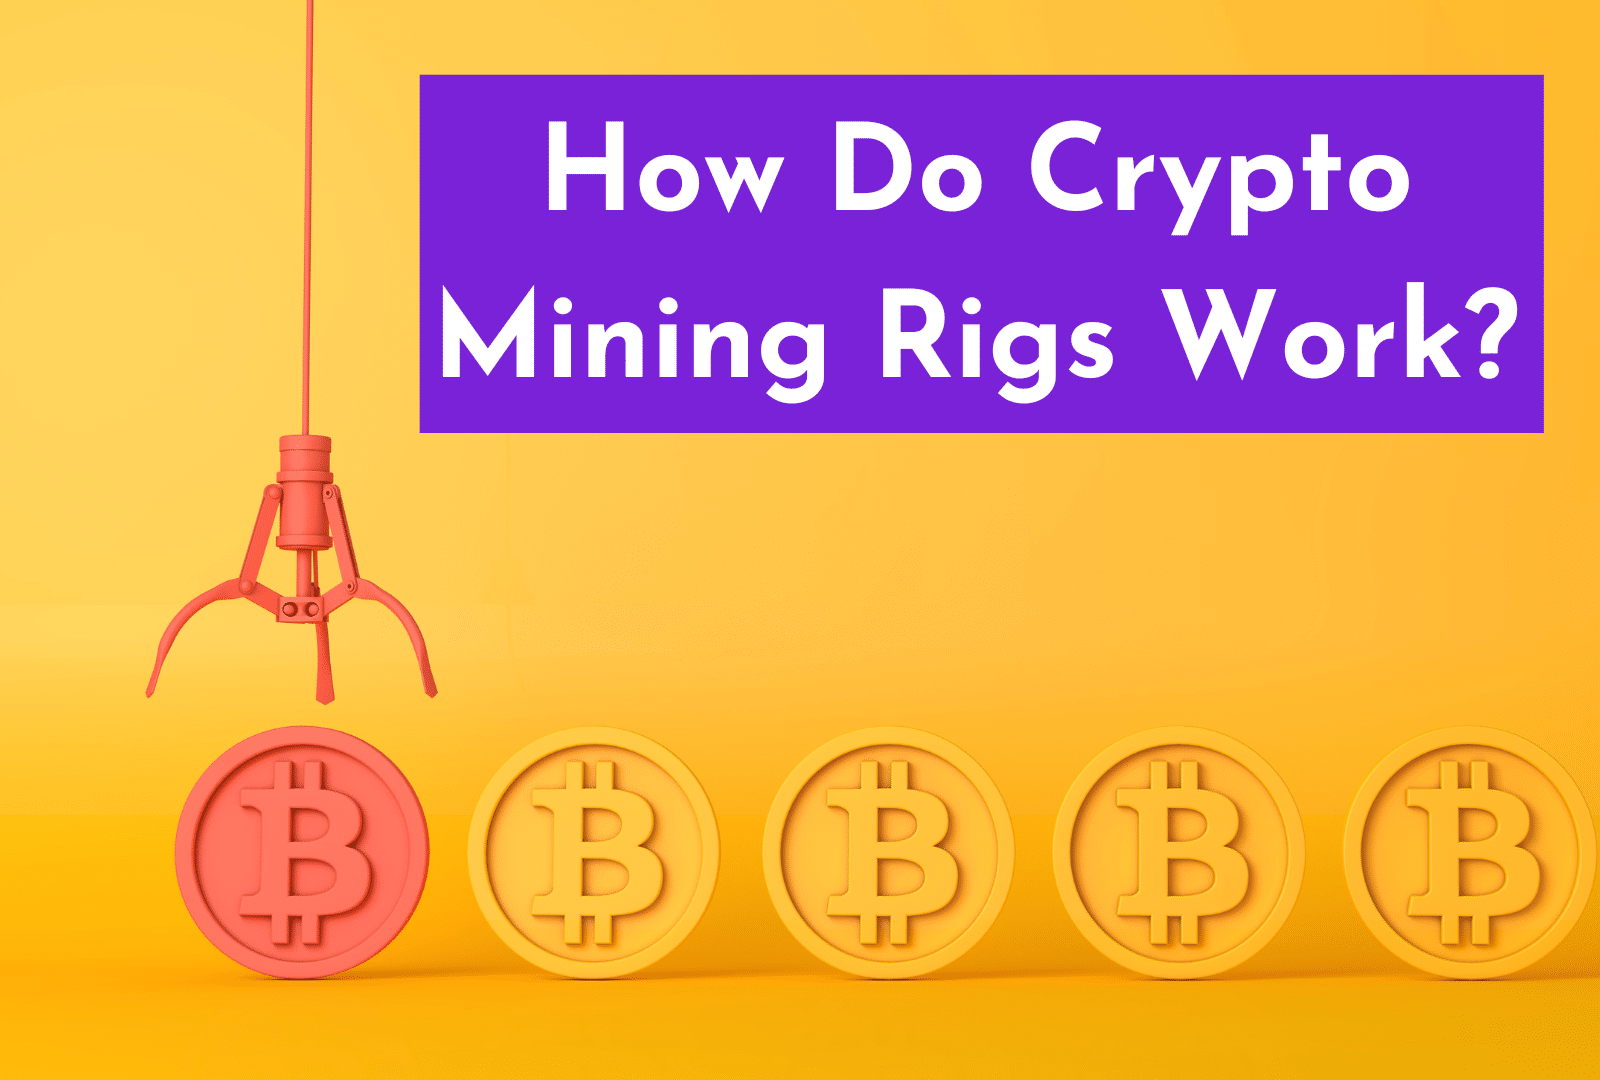 C:\Users\lenovo\Downloads\How Do Cryptocurrency Mining Rigs Work.png